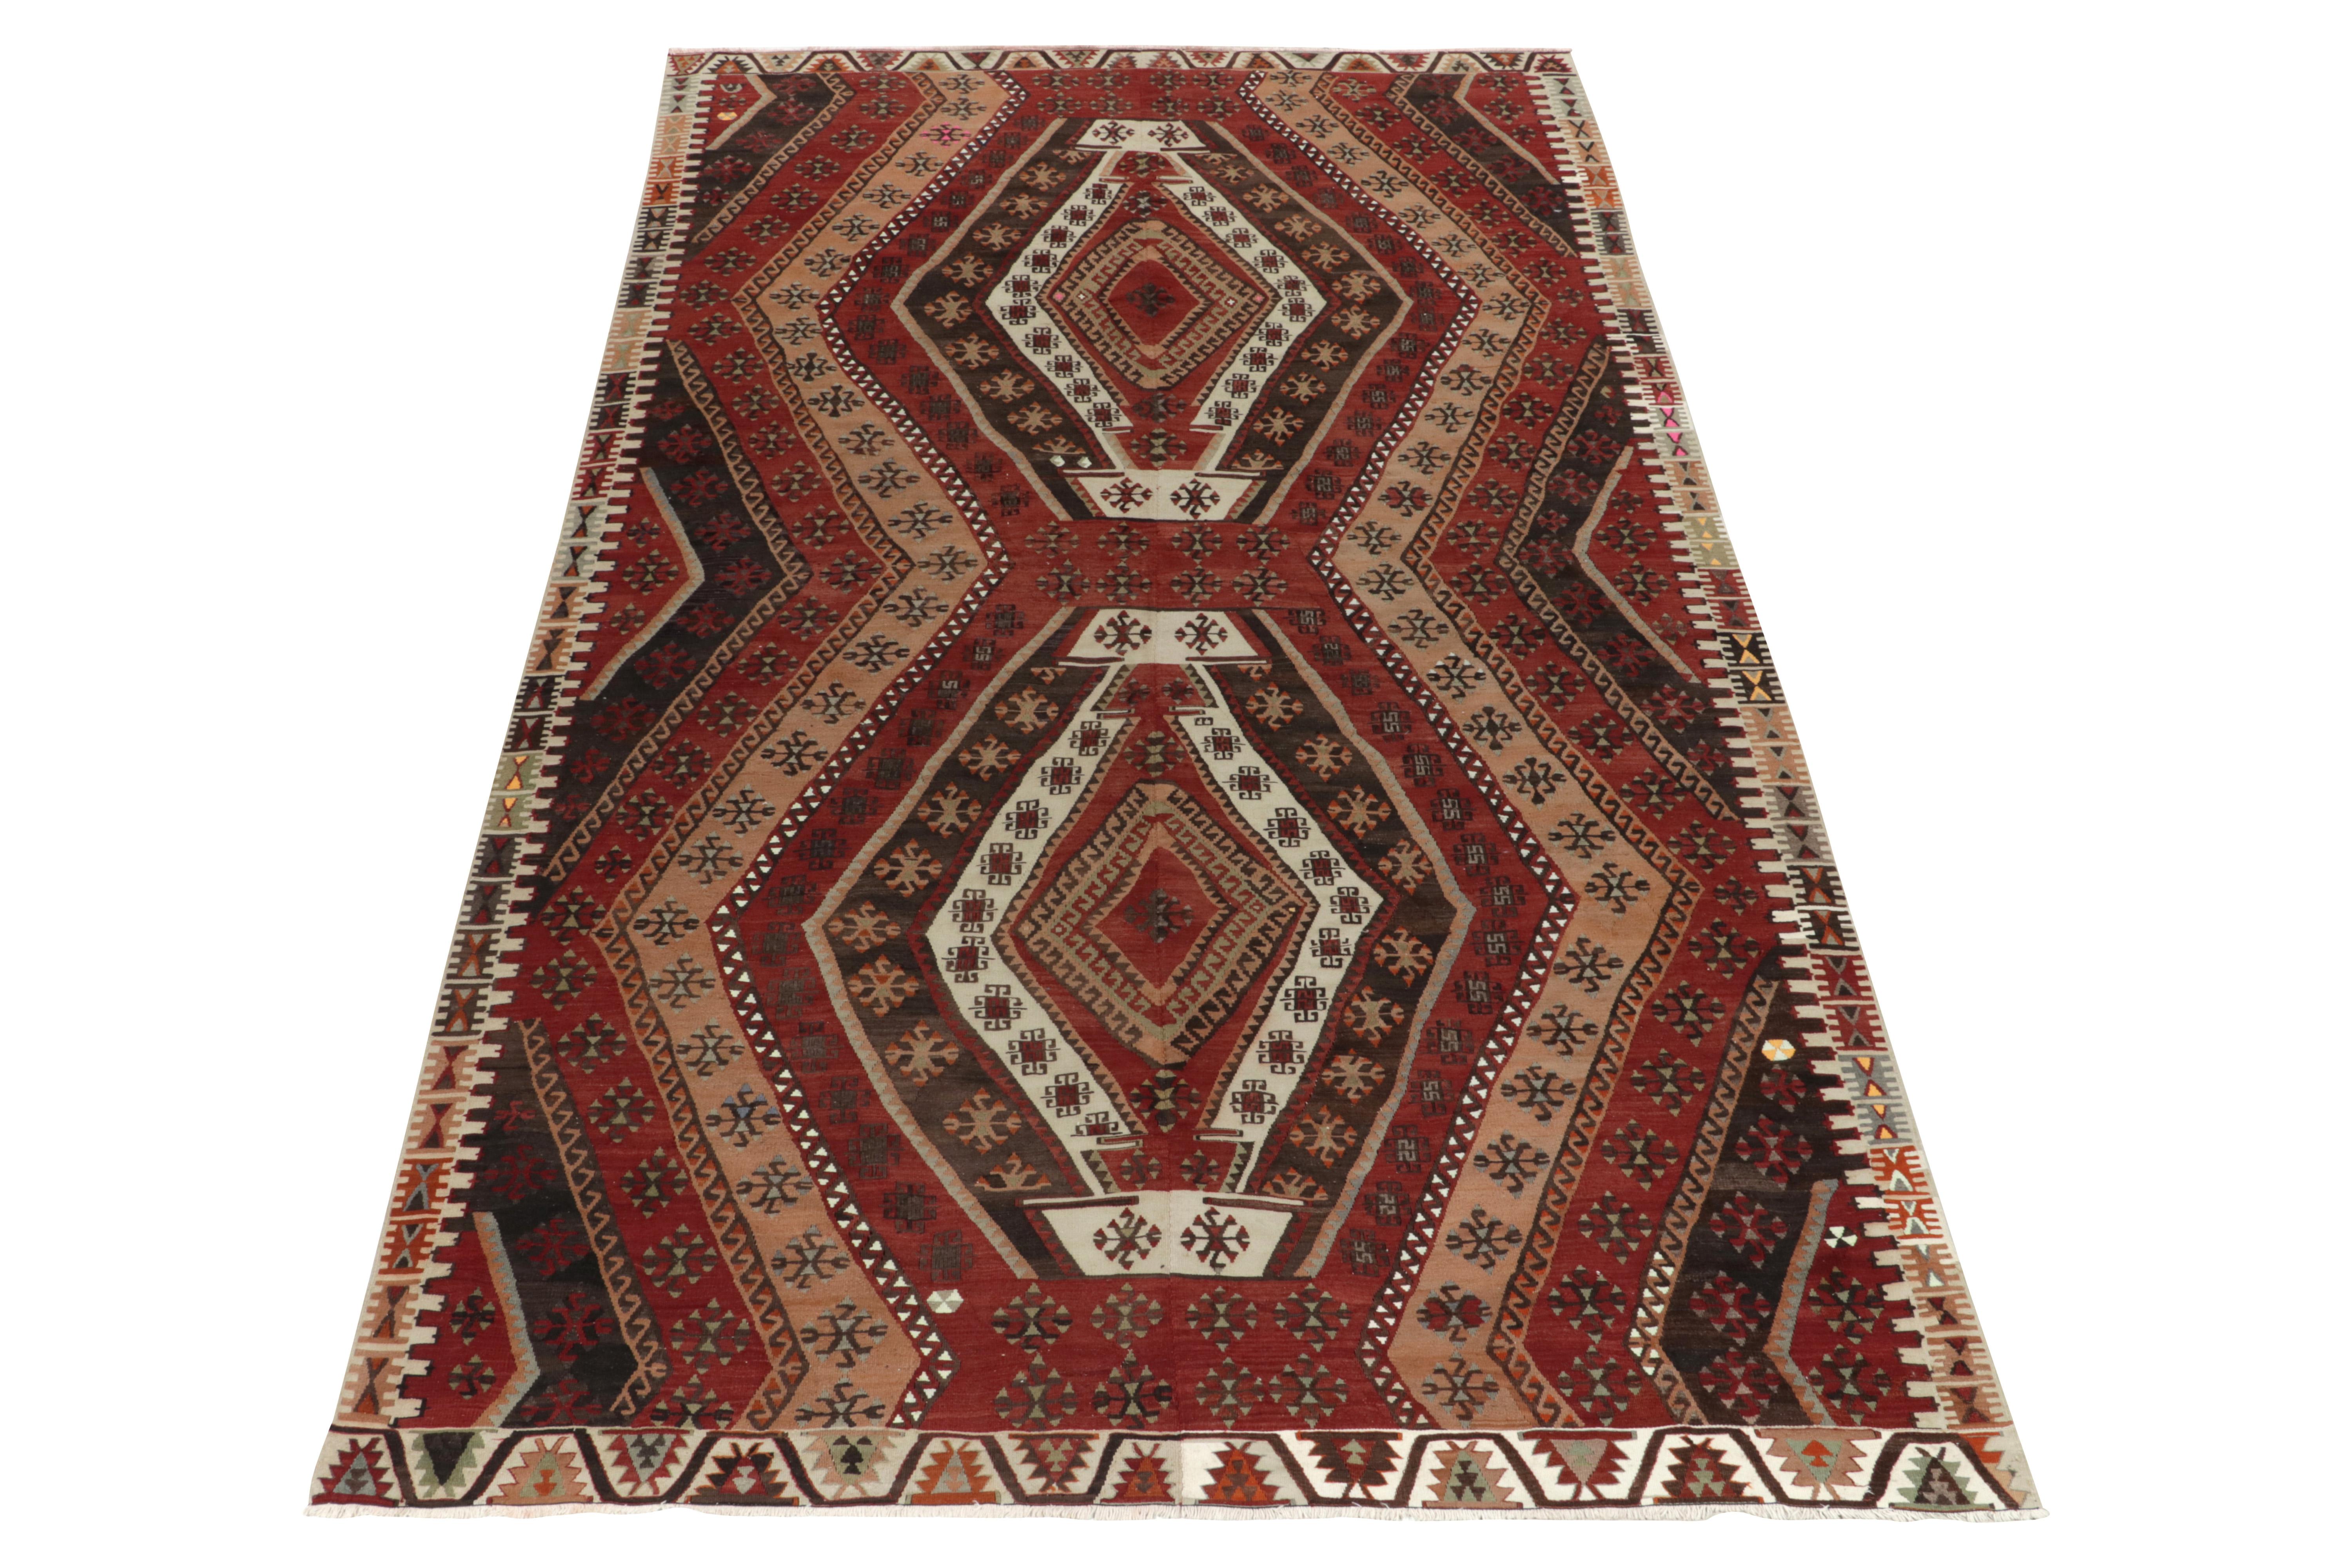 This 8x13 vintage tribal kilim rug remarks a prestigious addition in our flatweave collection. This particular mid-century flatweave from Turkey features a diamond pattern alternating in tones of red, beige, brown & white. From the 1950s, an